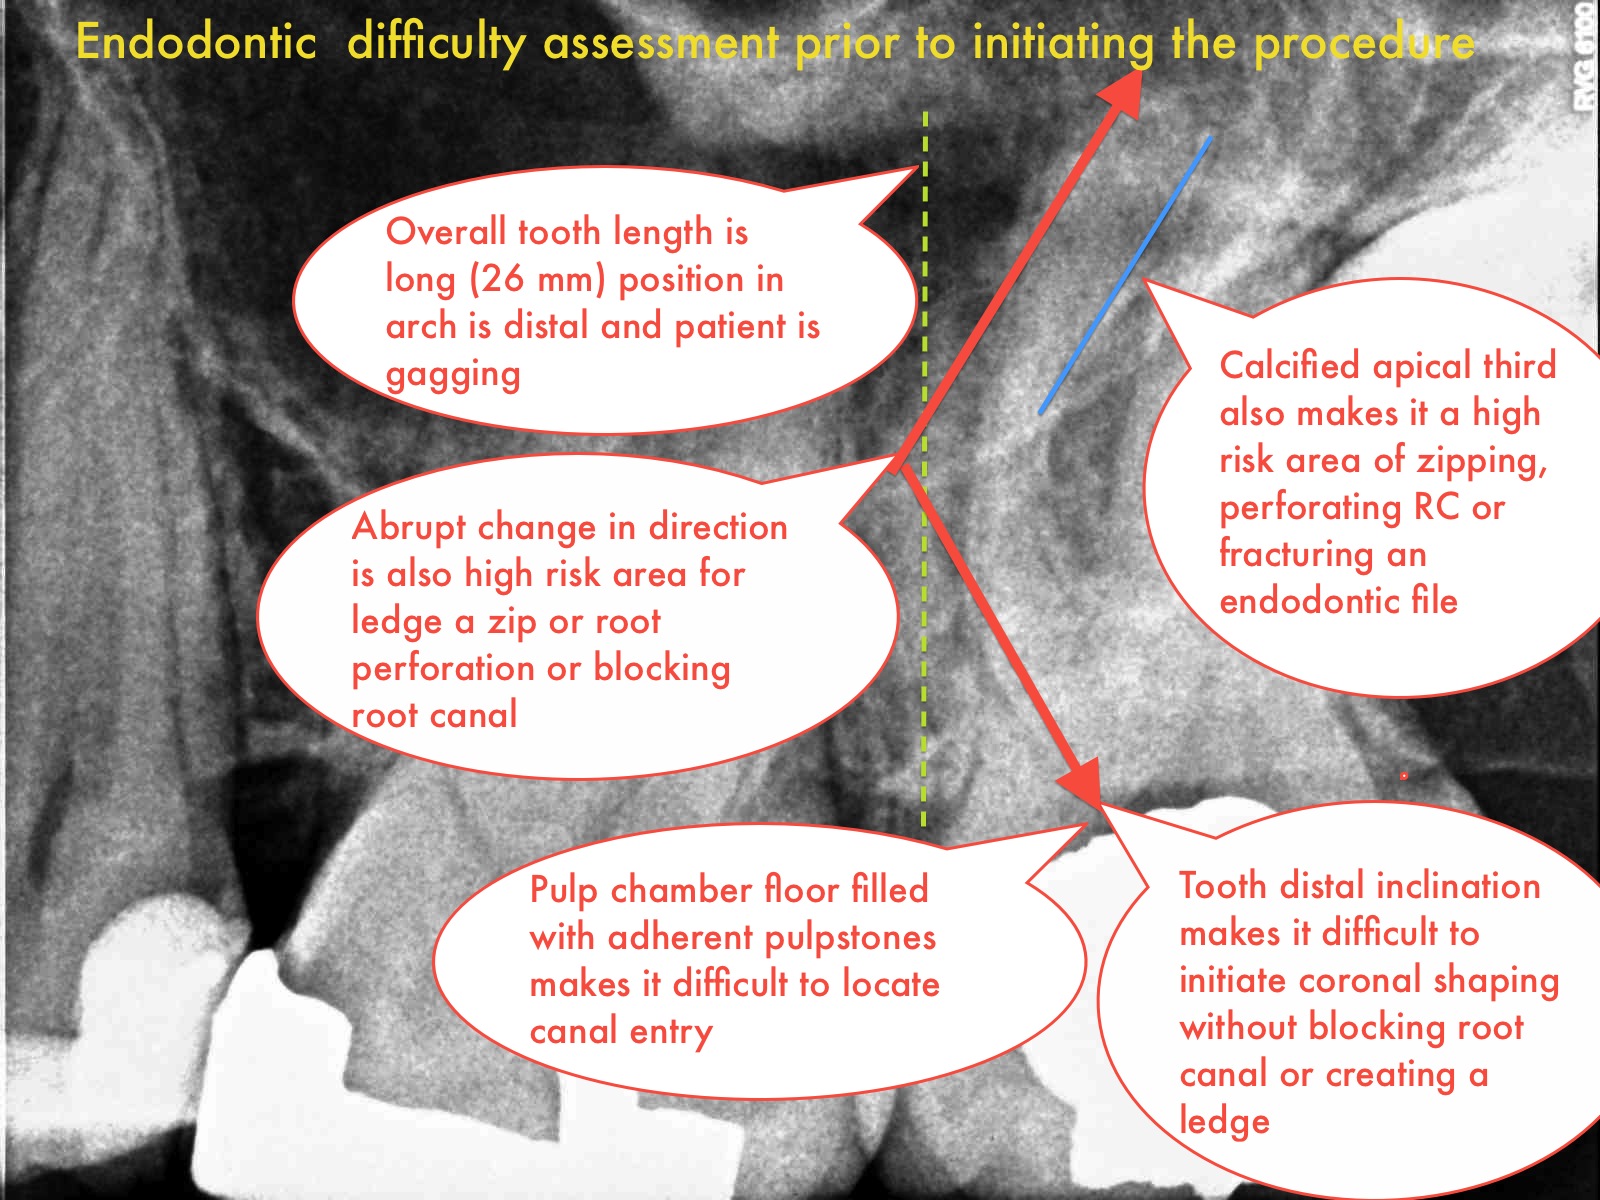 A root canal procedure assessed at a Class 3 level of difficulty and risk